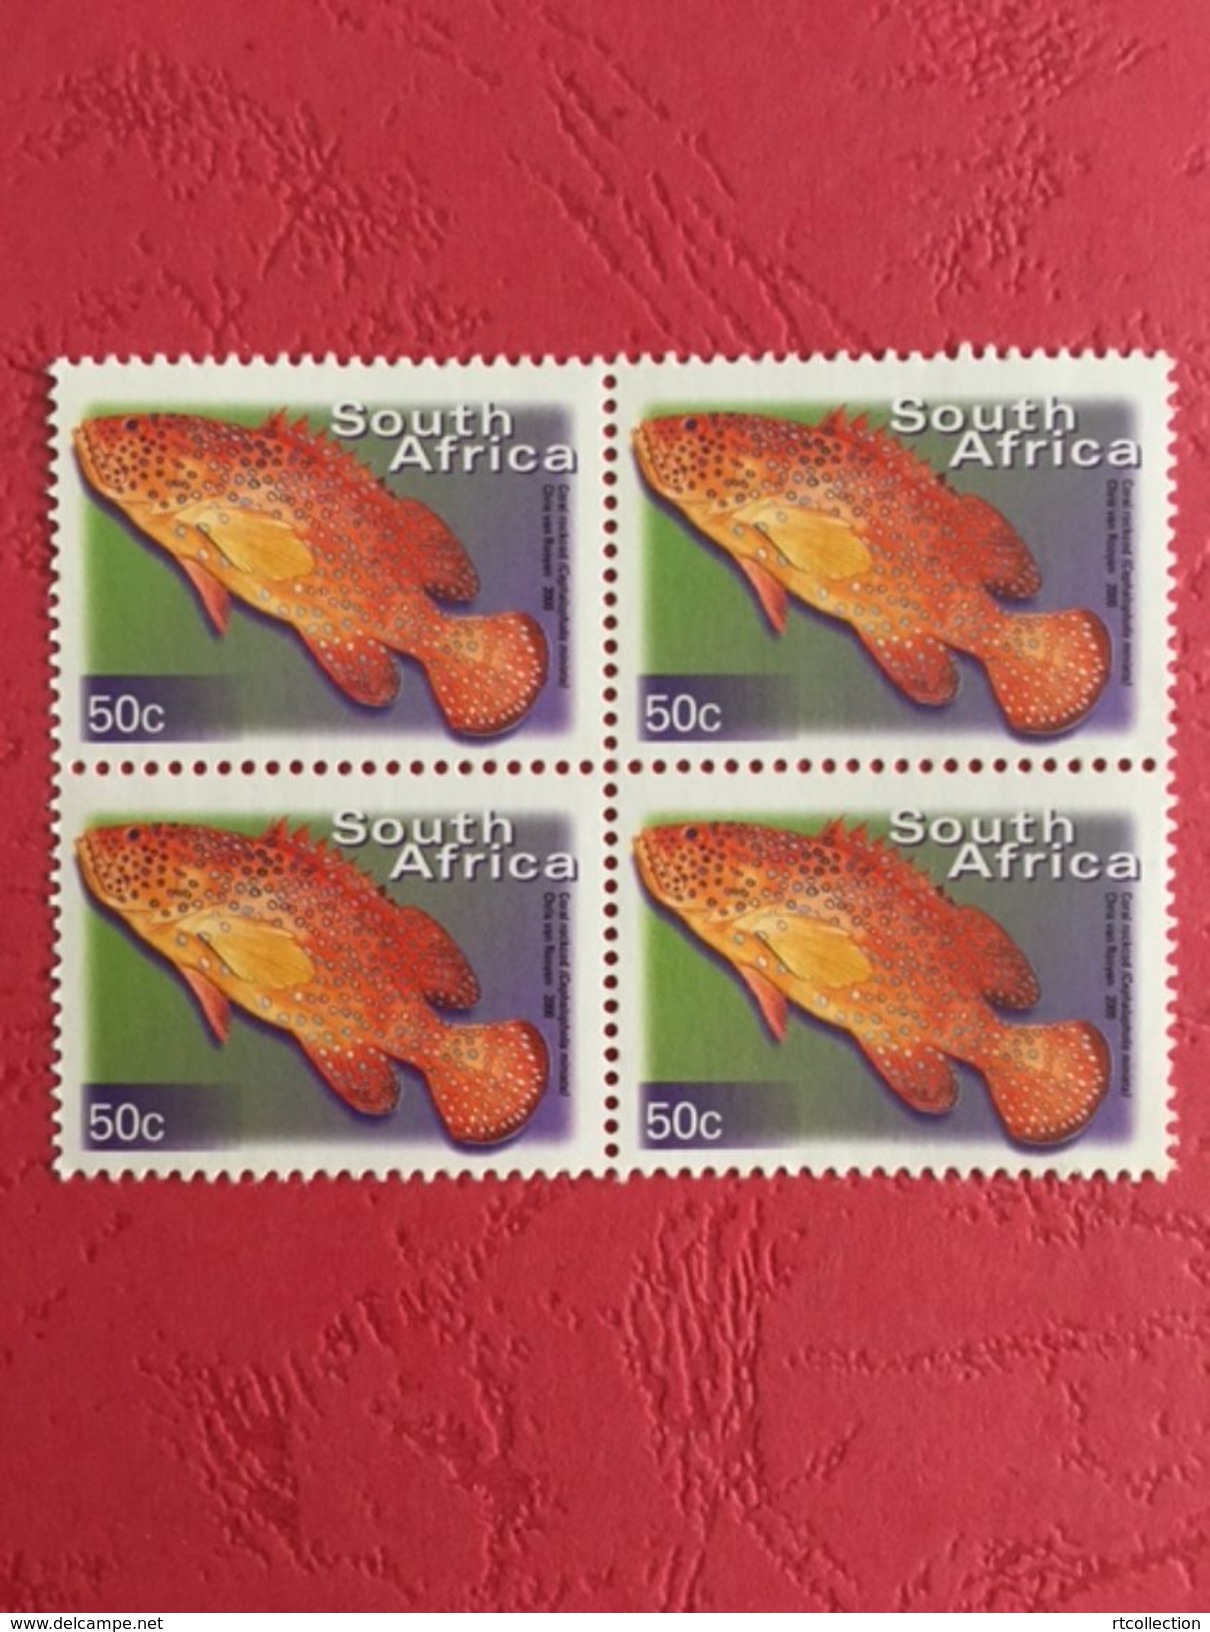 South Africa 2000 Block Coral Rockcod Fishes Fish Animals Marine Life Sealife Nature Fauna 50c Stamps MNH SG 1210 - Blocs-feuillets